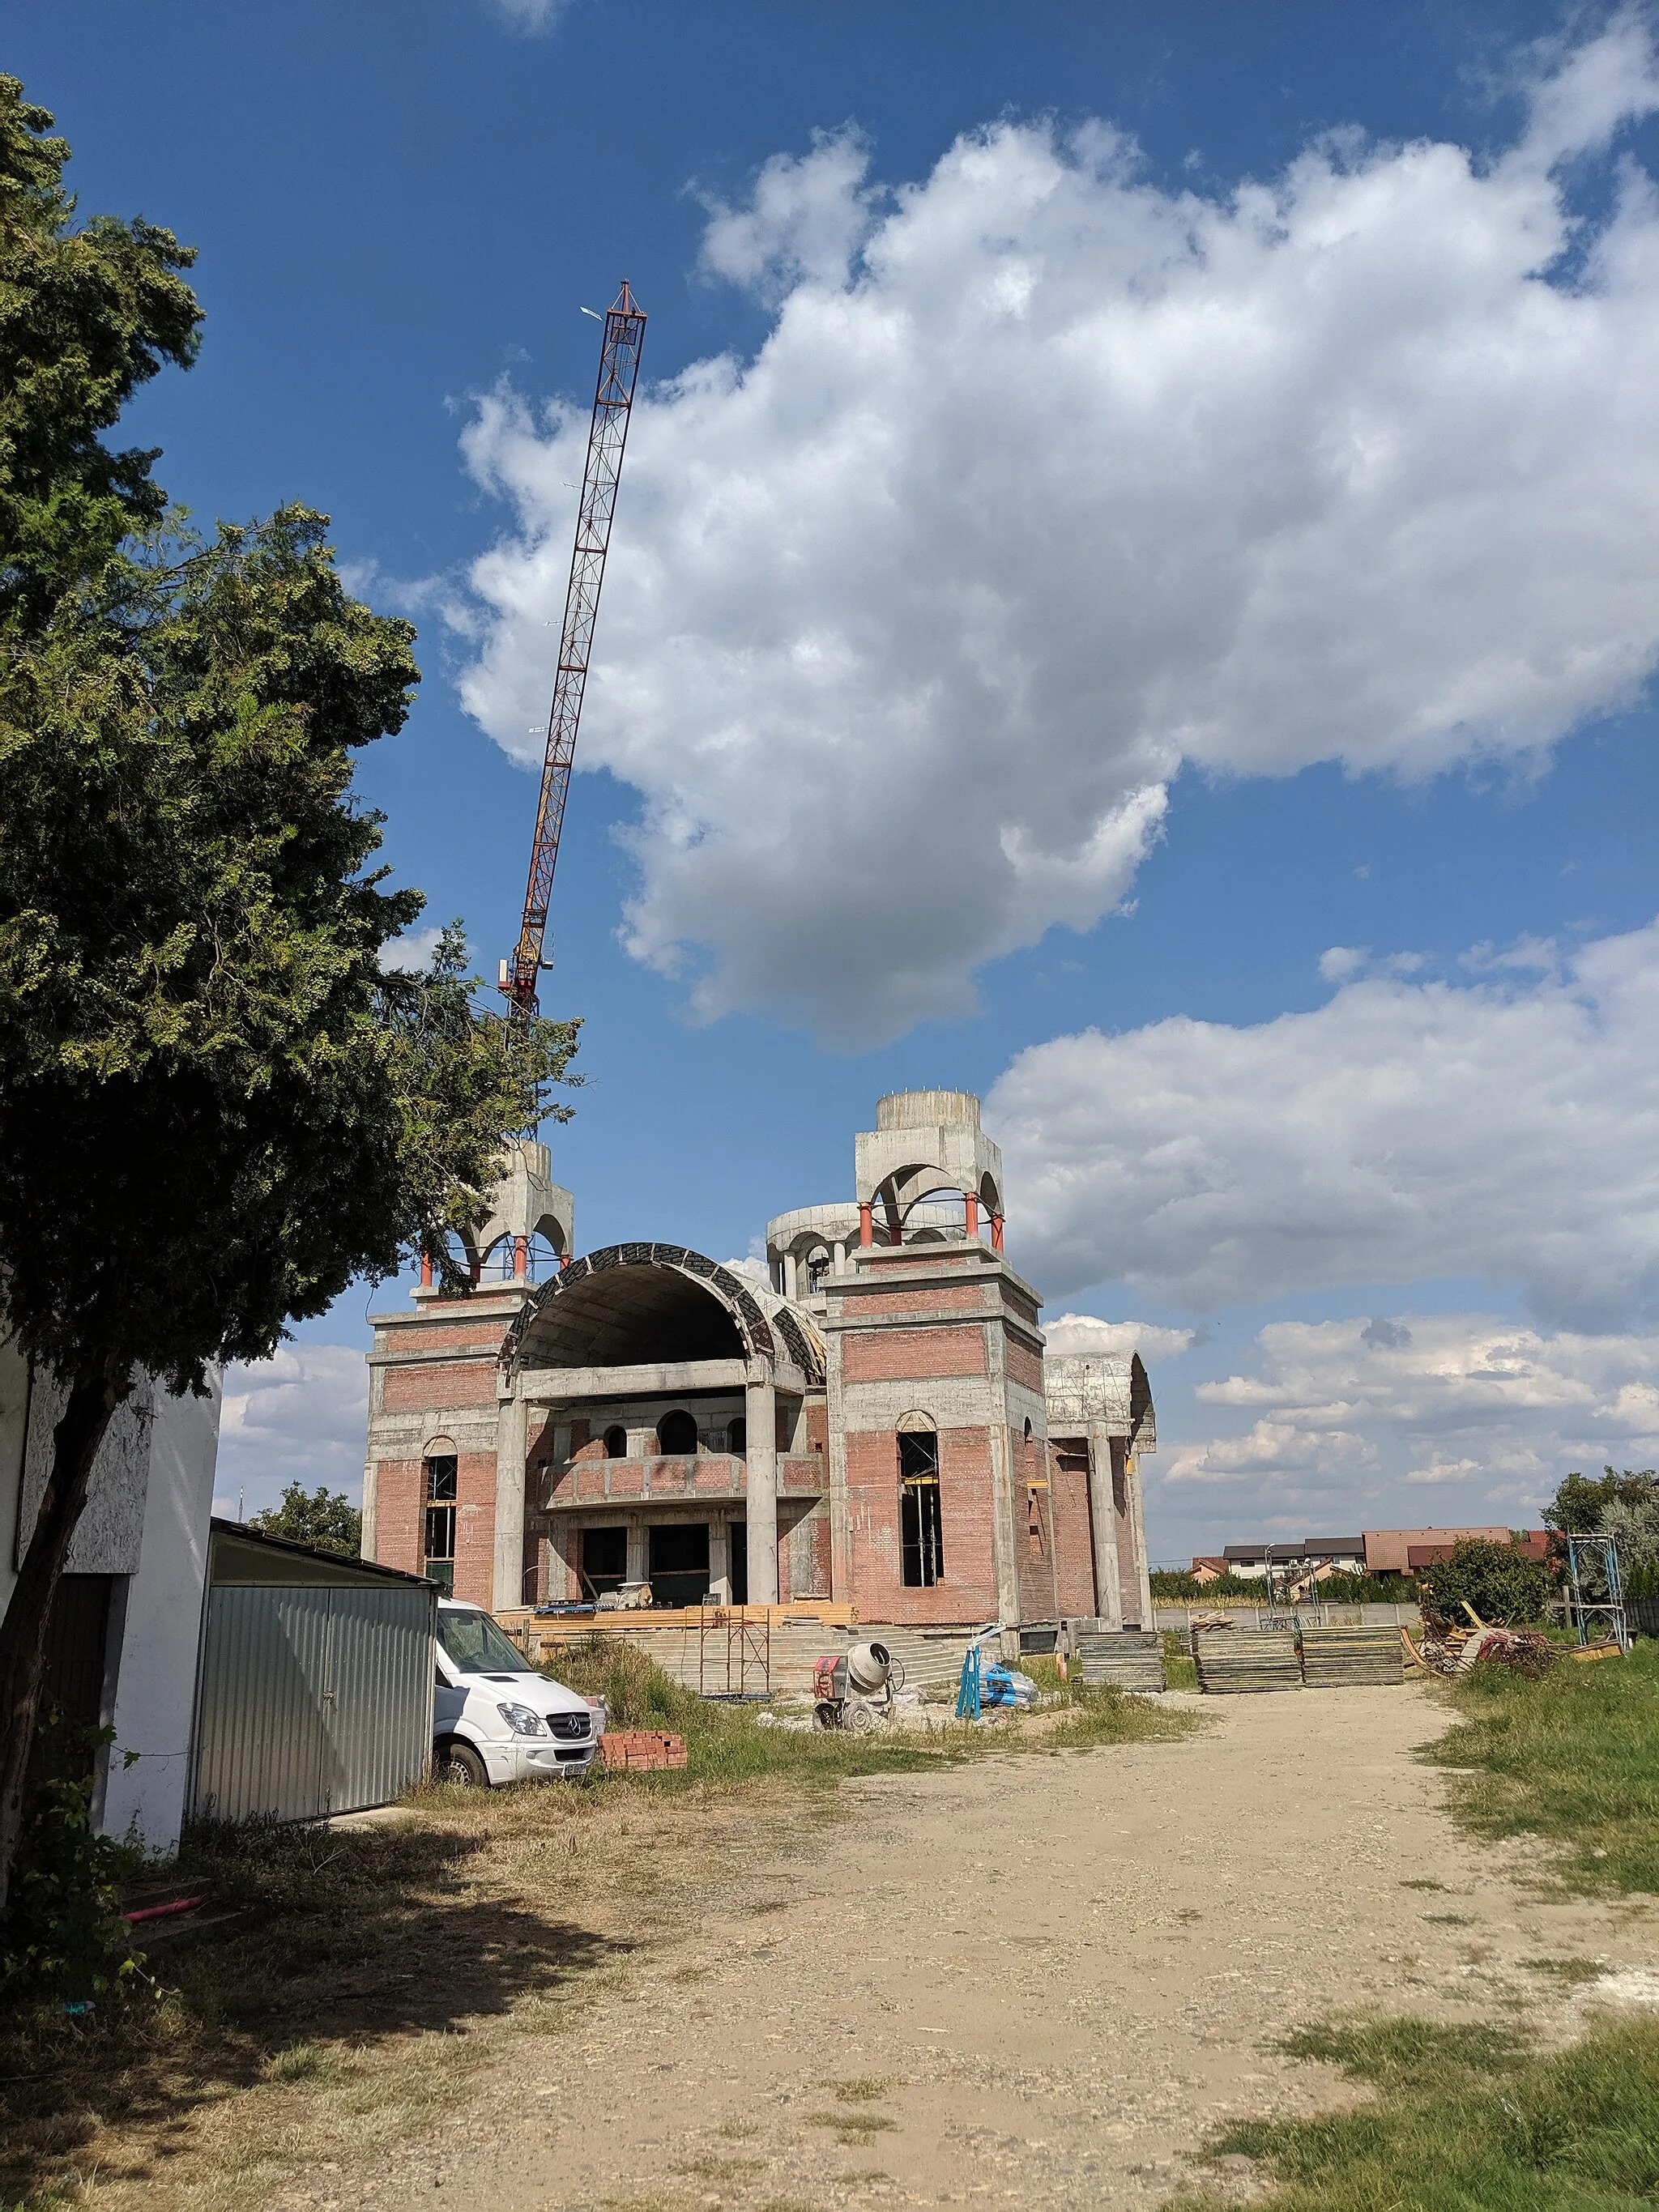 Photo showing: Church under construction in Giroc, Timis, Romania